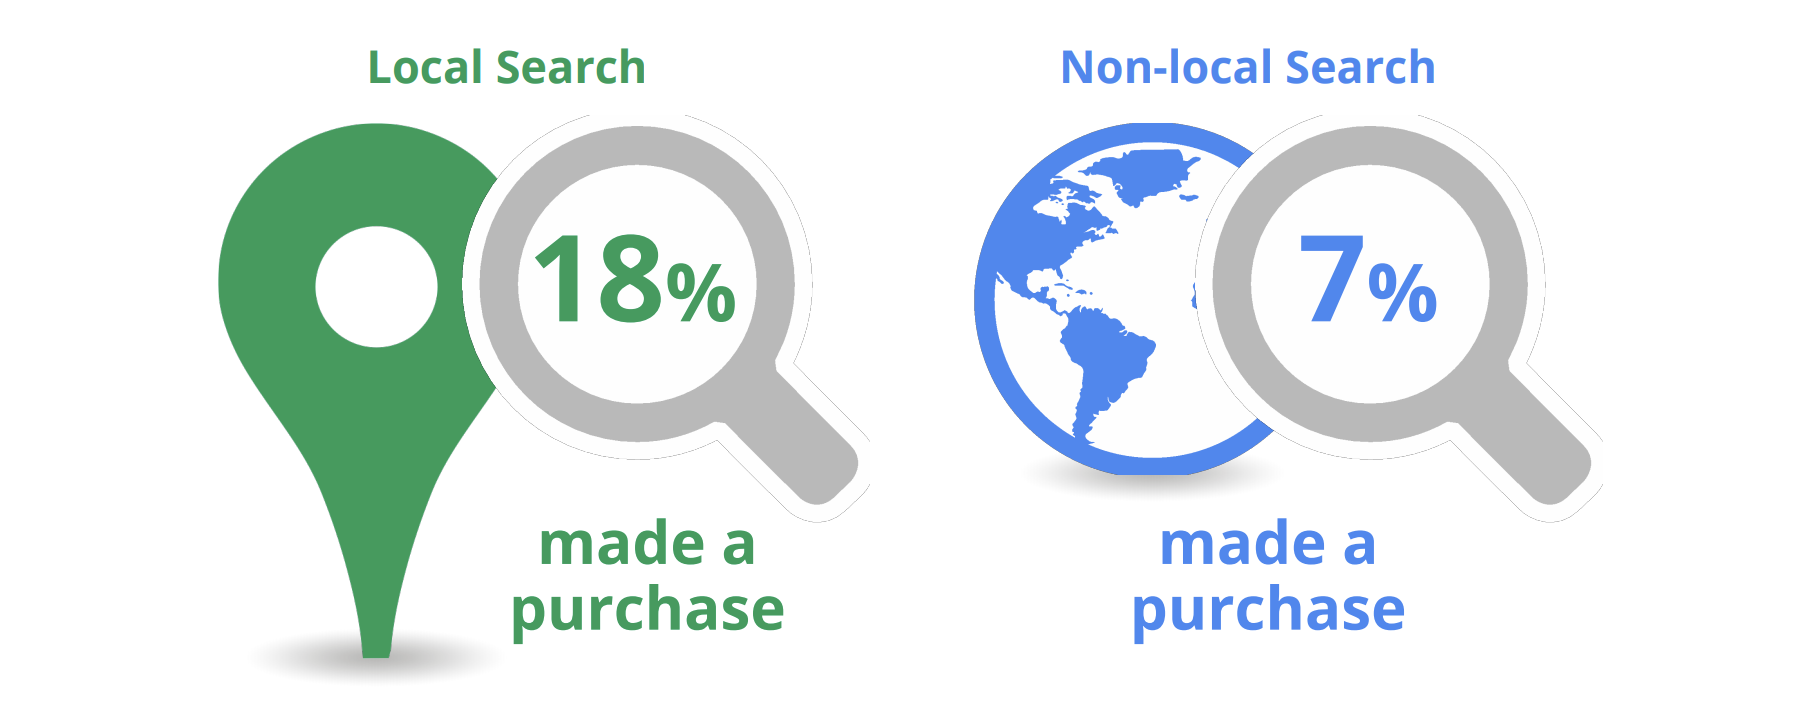 Local searchers have higher purchase intent